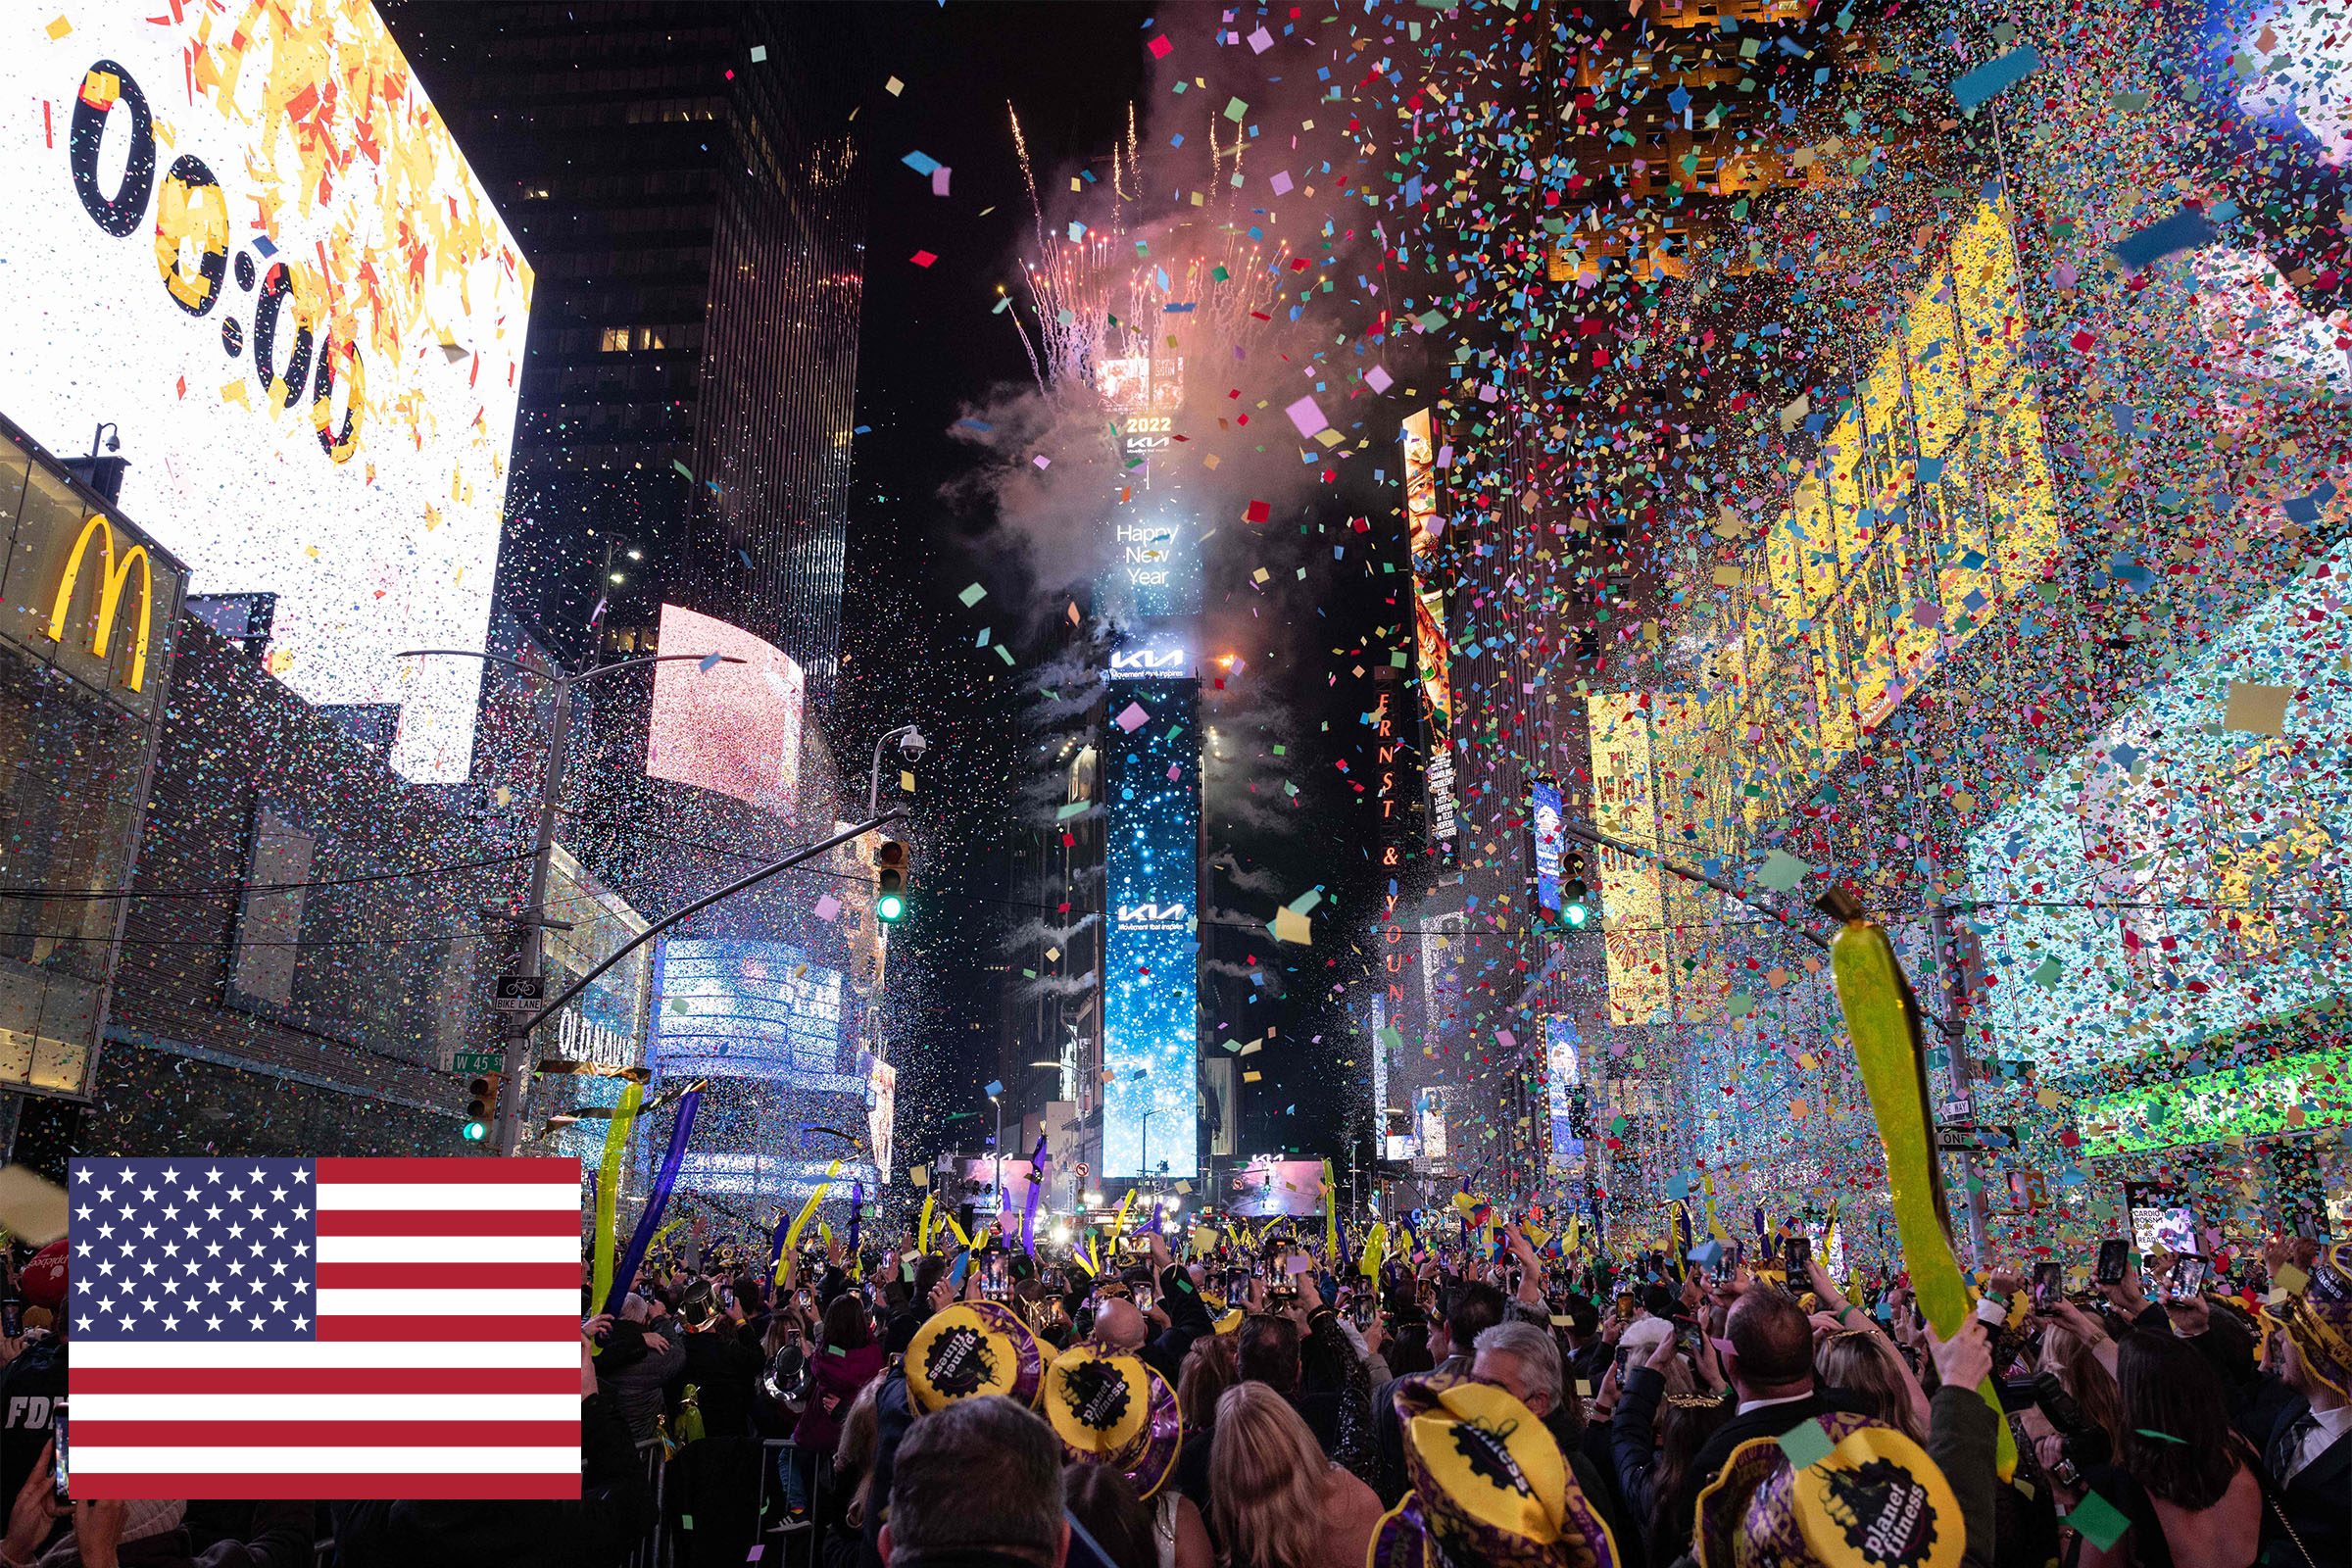 30 New Year's Traditions to Start the Year Off Right in 2024